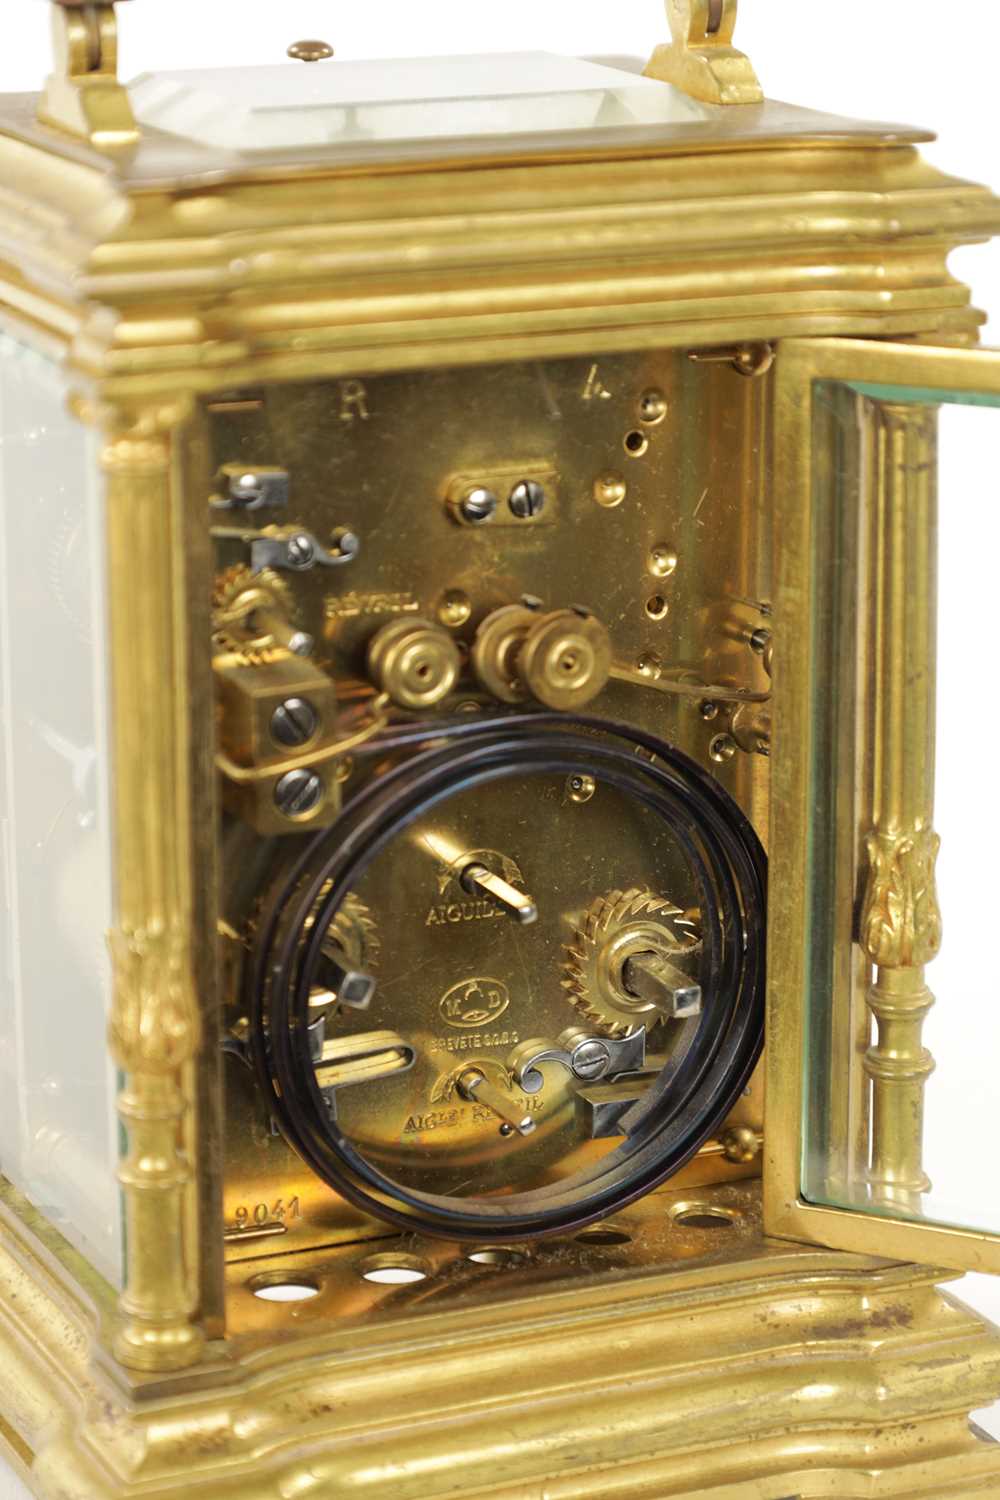 A LATE 19TH CENTURY GRAND SONNERIE REPEATING CARRIAGE CLOCK WITH ALAR - Image 7 of 8